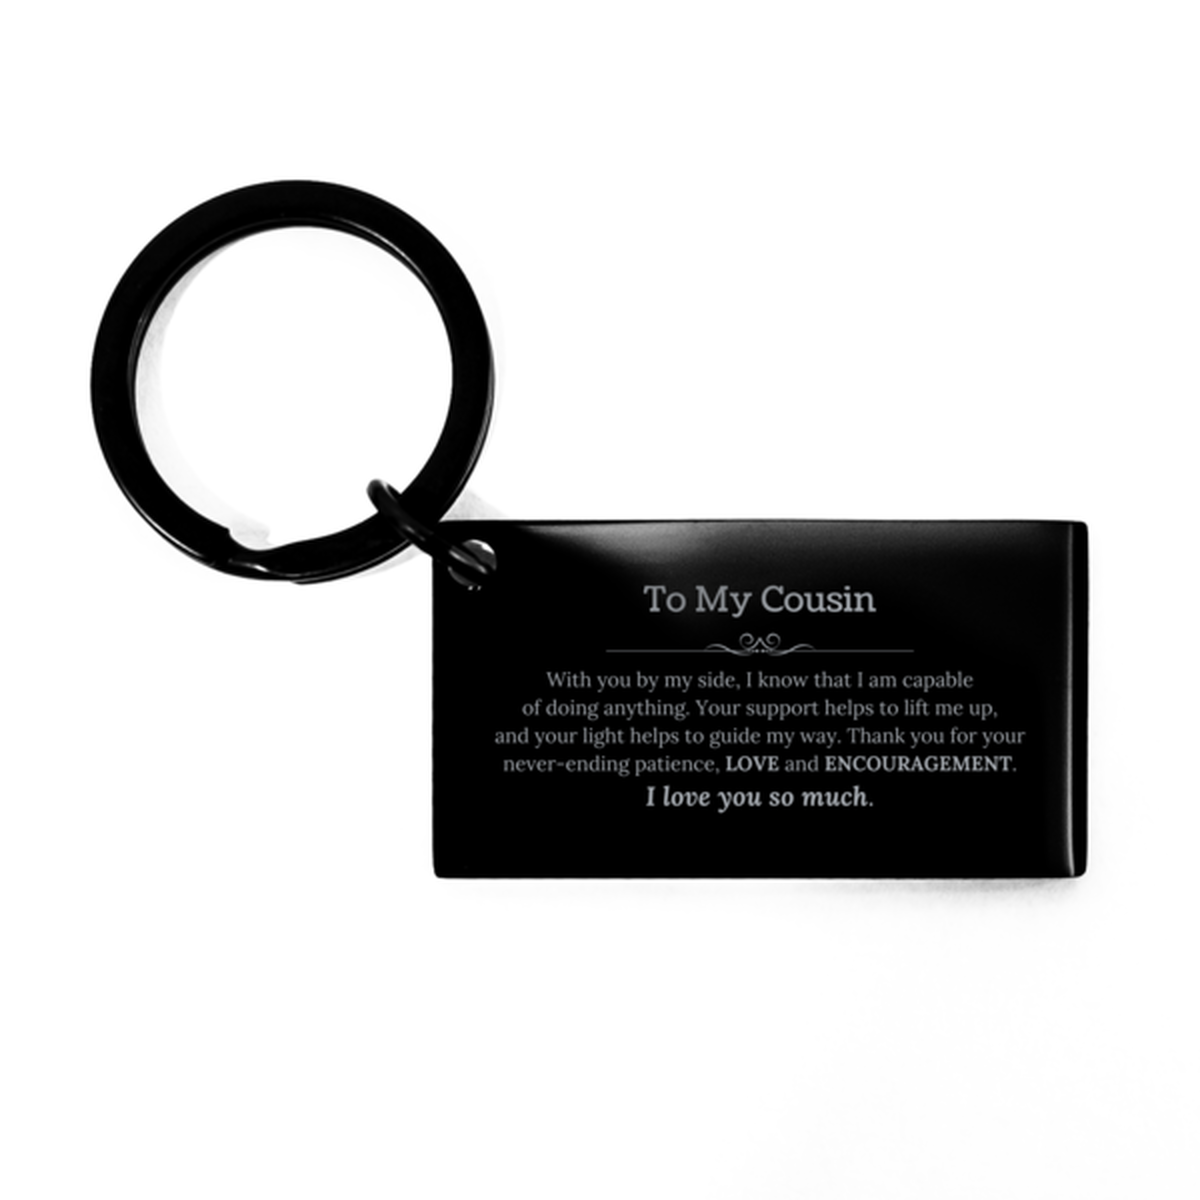 Appreciation Cousin Keychain Gifts, To My Cousin Birthday Christmas Wedding Keepsake Gifts for Cousin With you by my side, I know that I am capable of doing anything. I love you so much